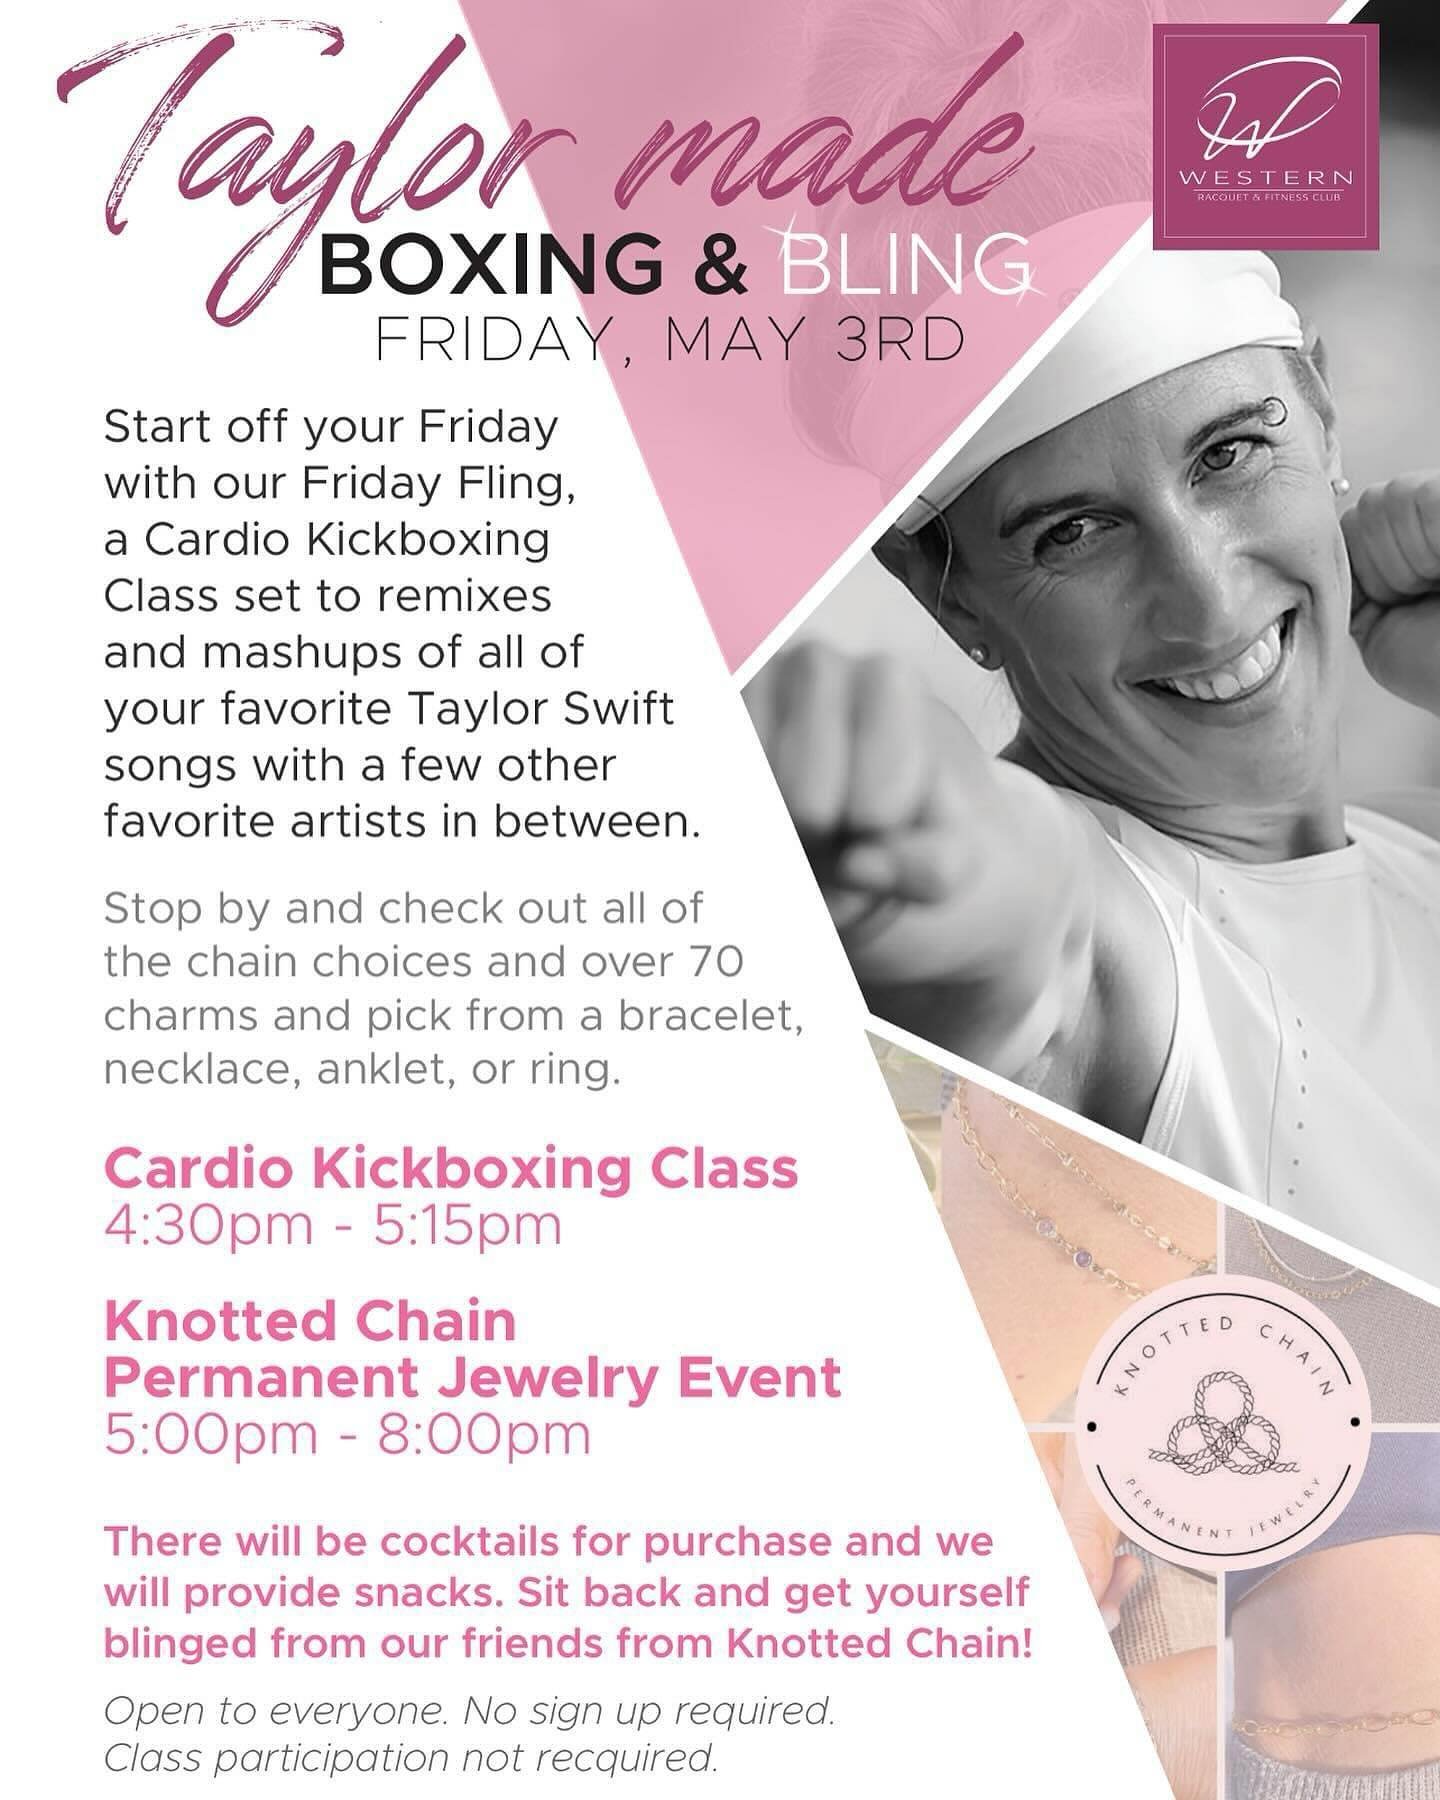 We are 8 days away!! Join @kariofitness for a Cardio Kickboxing class all set to Taylor Swift (and friends). Punch. Kick. Sing

Our friends at @knottedchain will be set up and ready to bling you out with permanent jewelry 💍 - check out their website